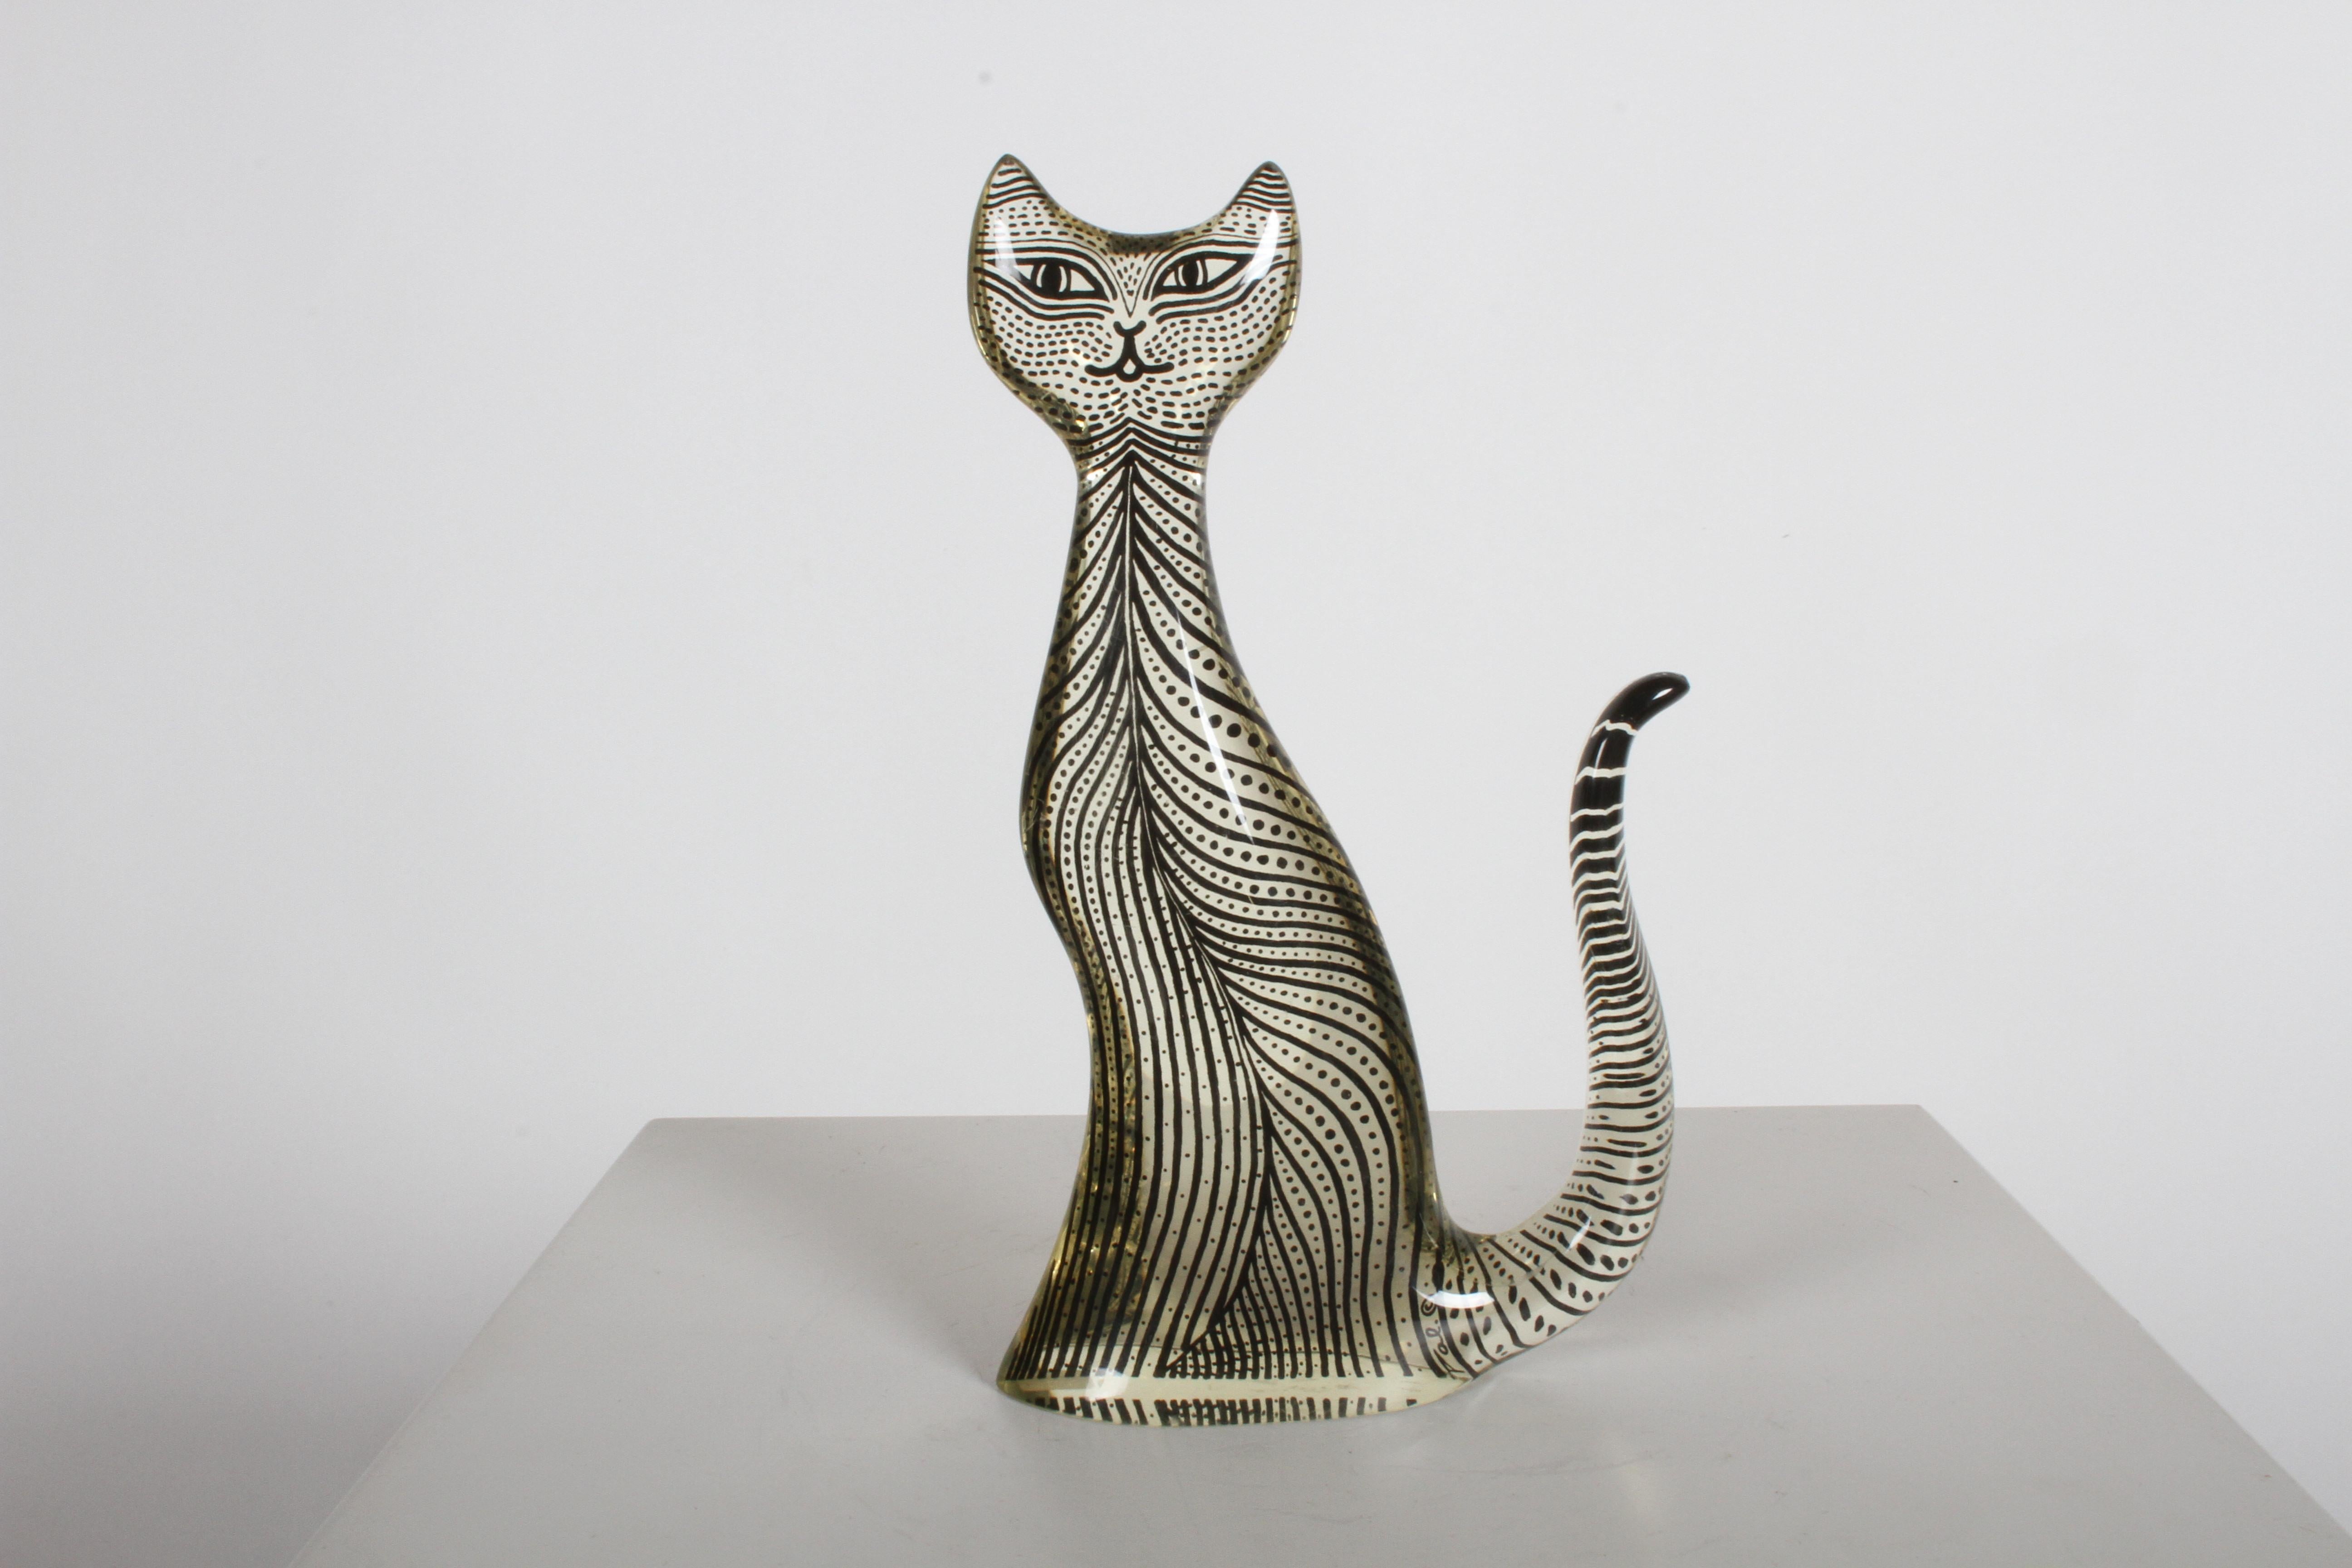 Tall cat animal sculpture by Brazilian Artist Abraham Palatnik, Lucite bold graphic details. In very nice condition. Retains made in Brazil label, plus artist initials inside sculpture PAL with copyright.

 